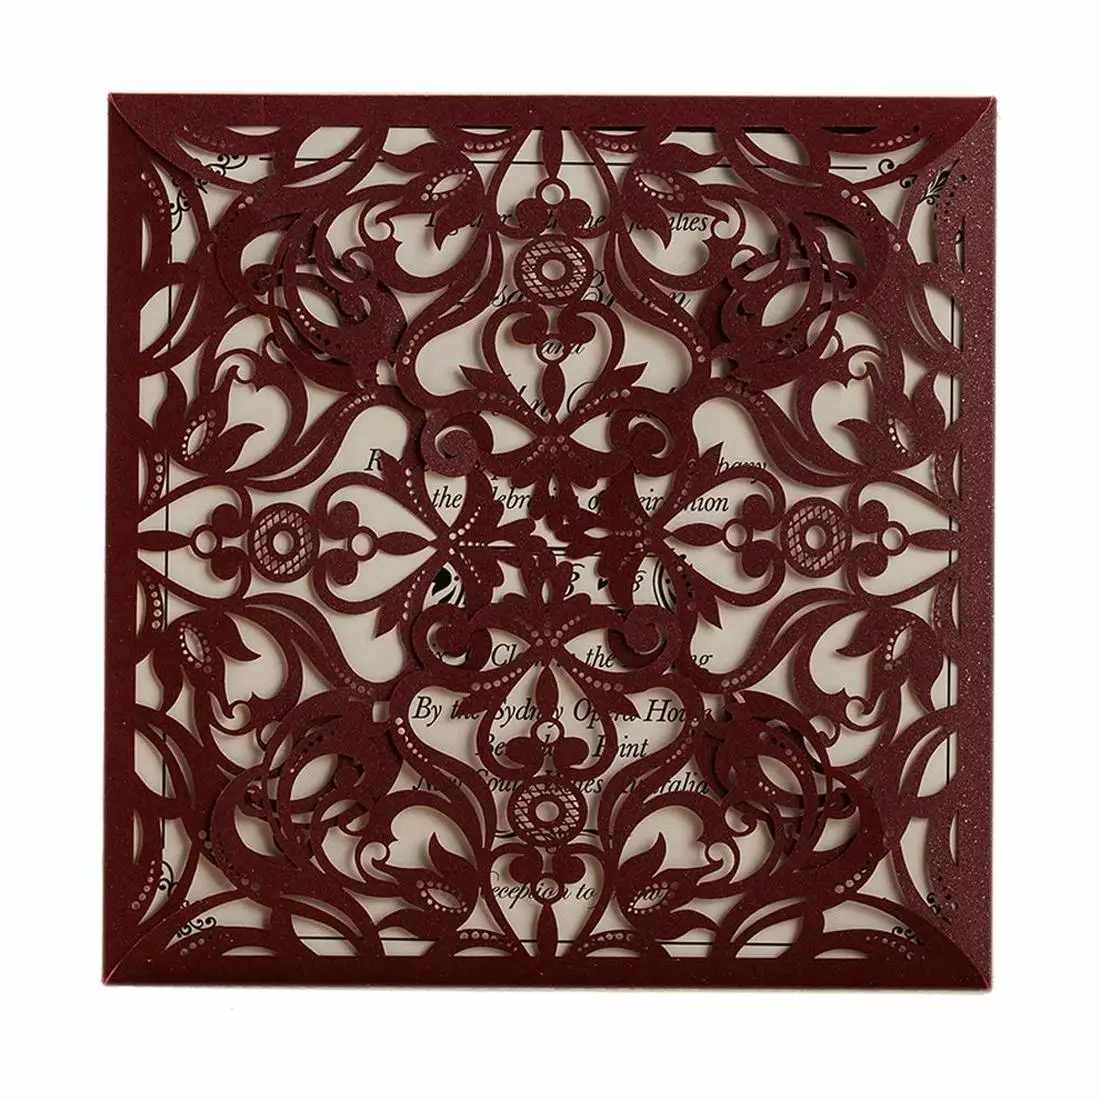 

1 Pcs Burgundy Square Laser Cut Wedding Invitations with Envelope, Blank Birthday Invites for Bridal Shower Dinner Party